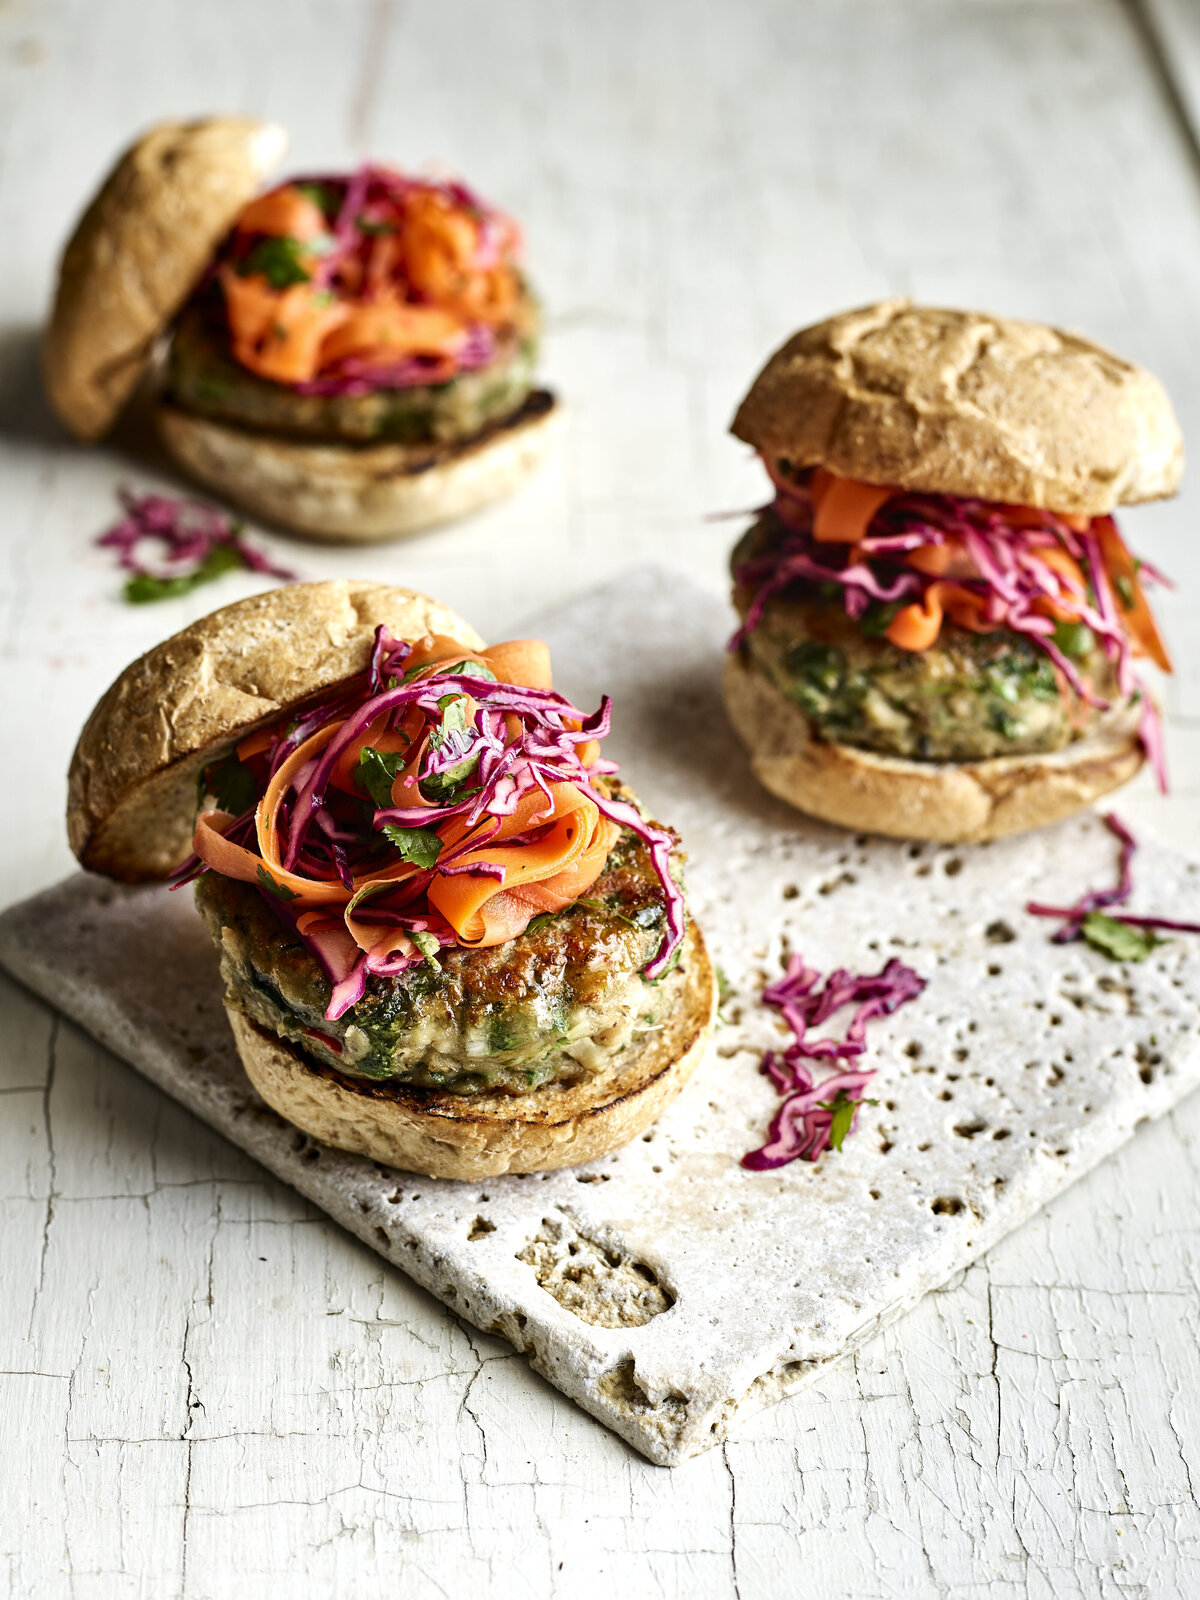 Three lamb burgers with melted cheese and slaw.